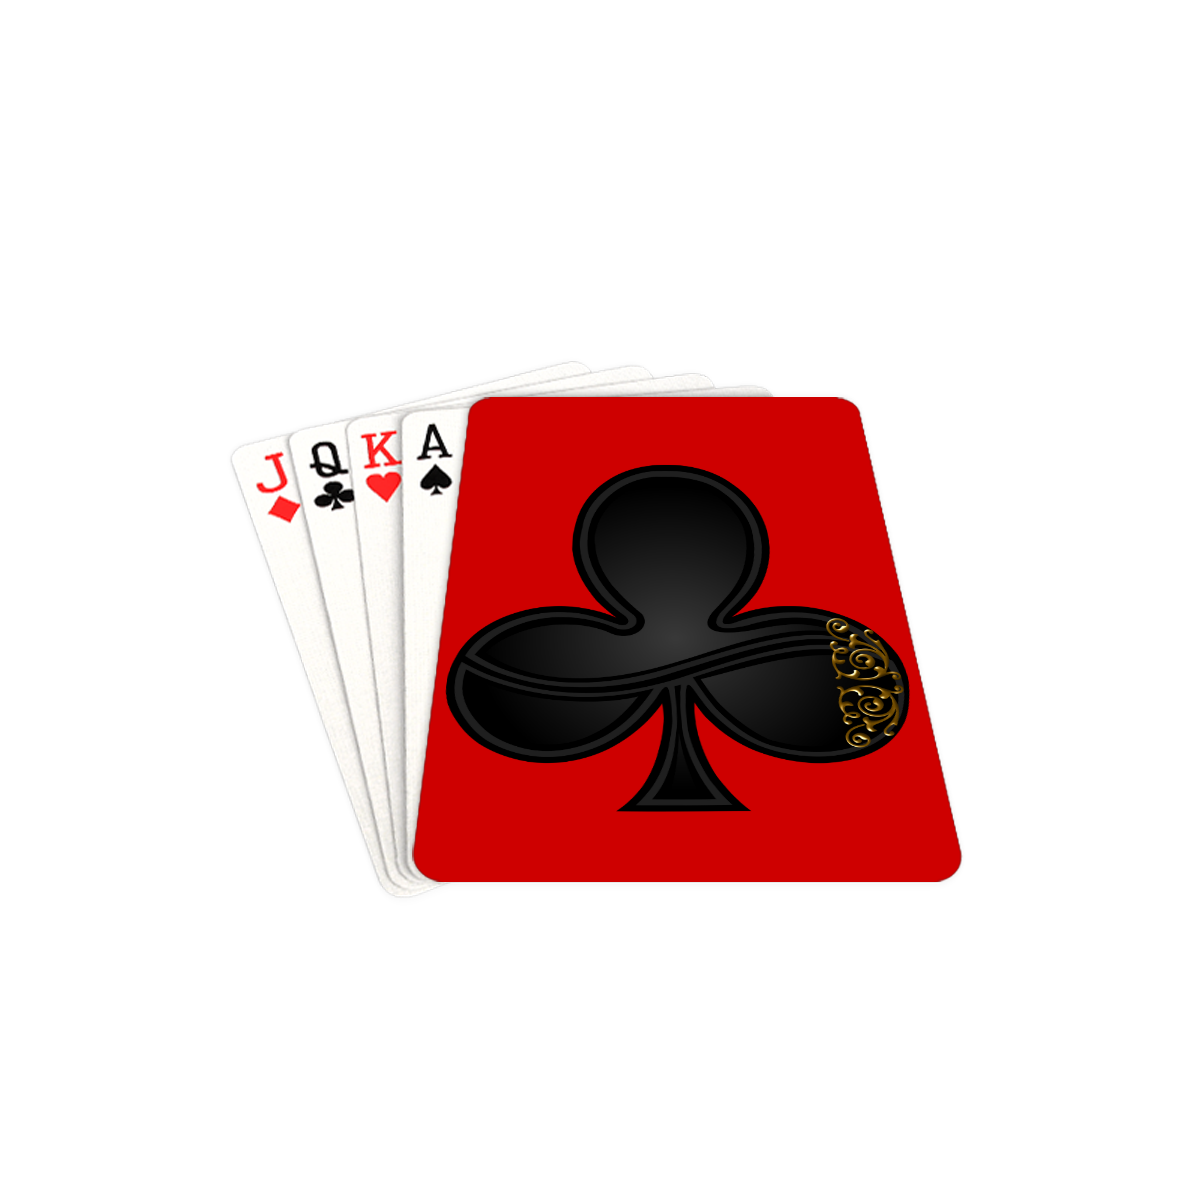 Club Las Vegas Playing Card Shape on Red Playing Cards 2.5"x3.5"